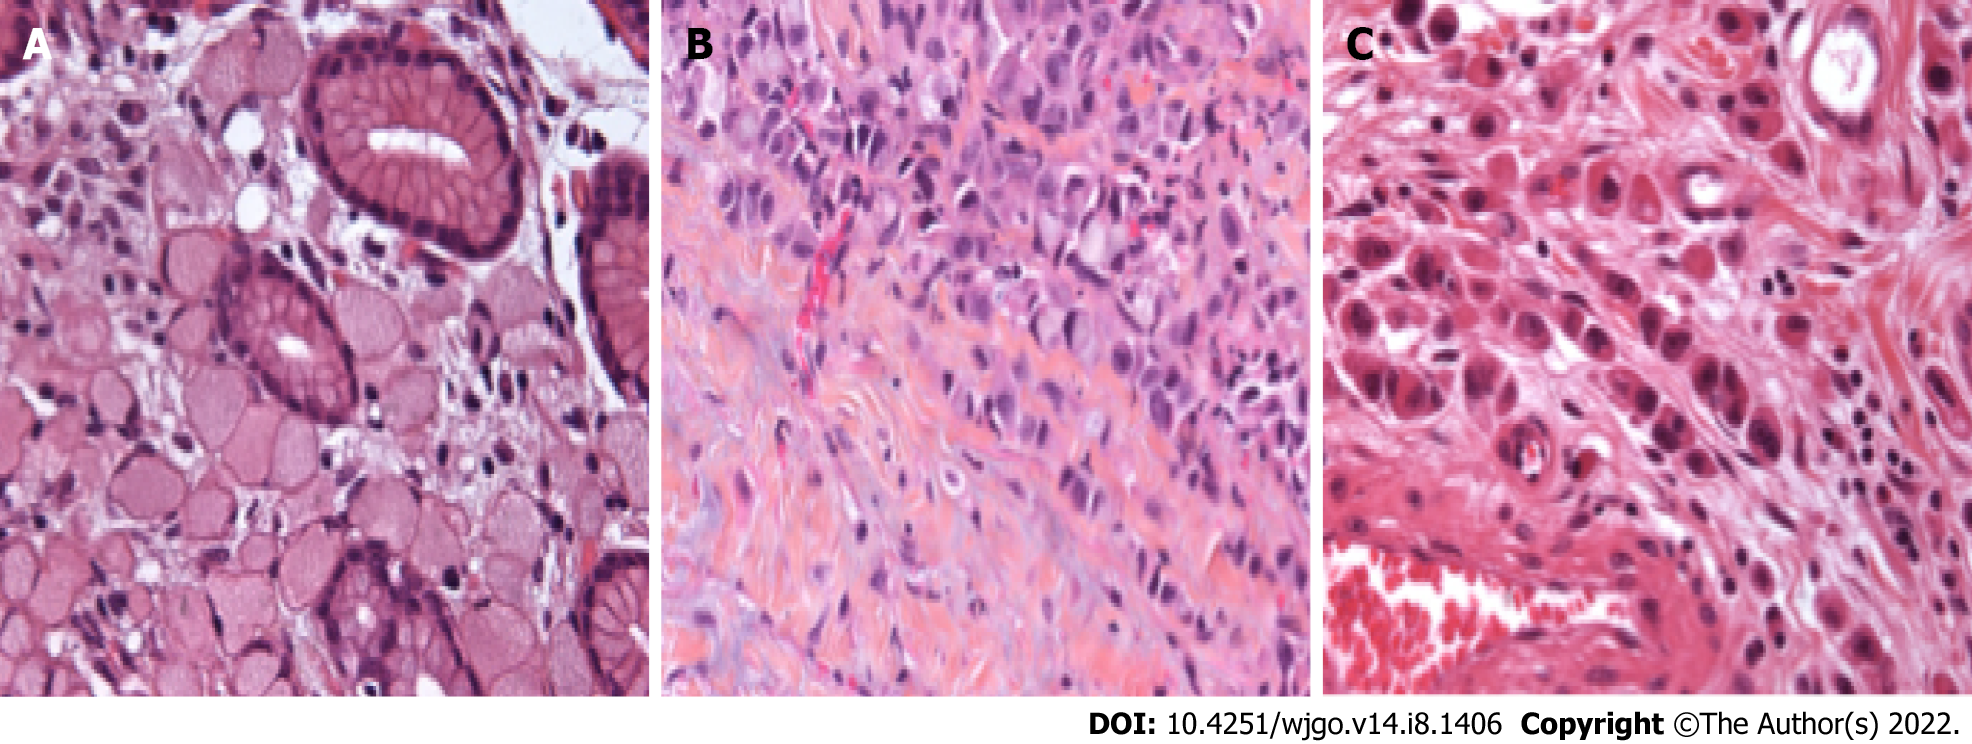 Metastatic Signet-Ring Cell Carcinoma Presenting as Acute Pancre